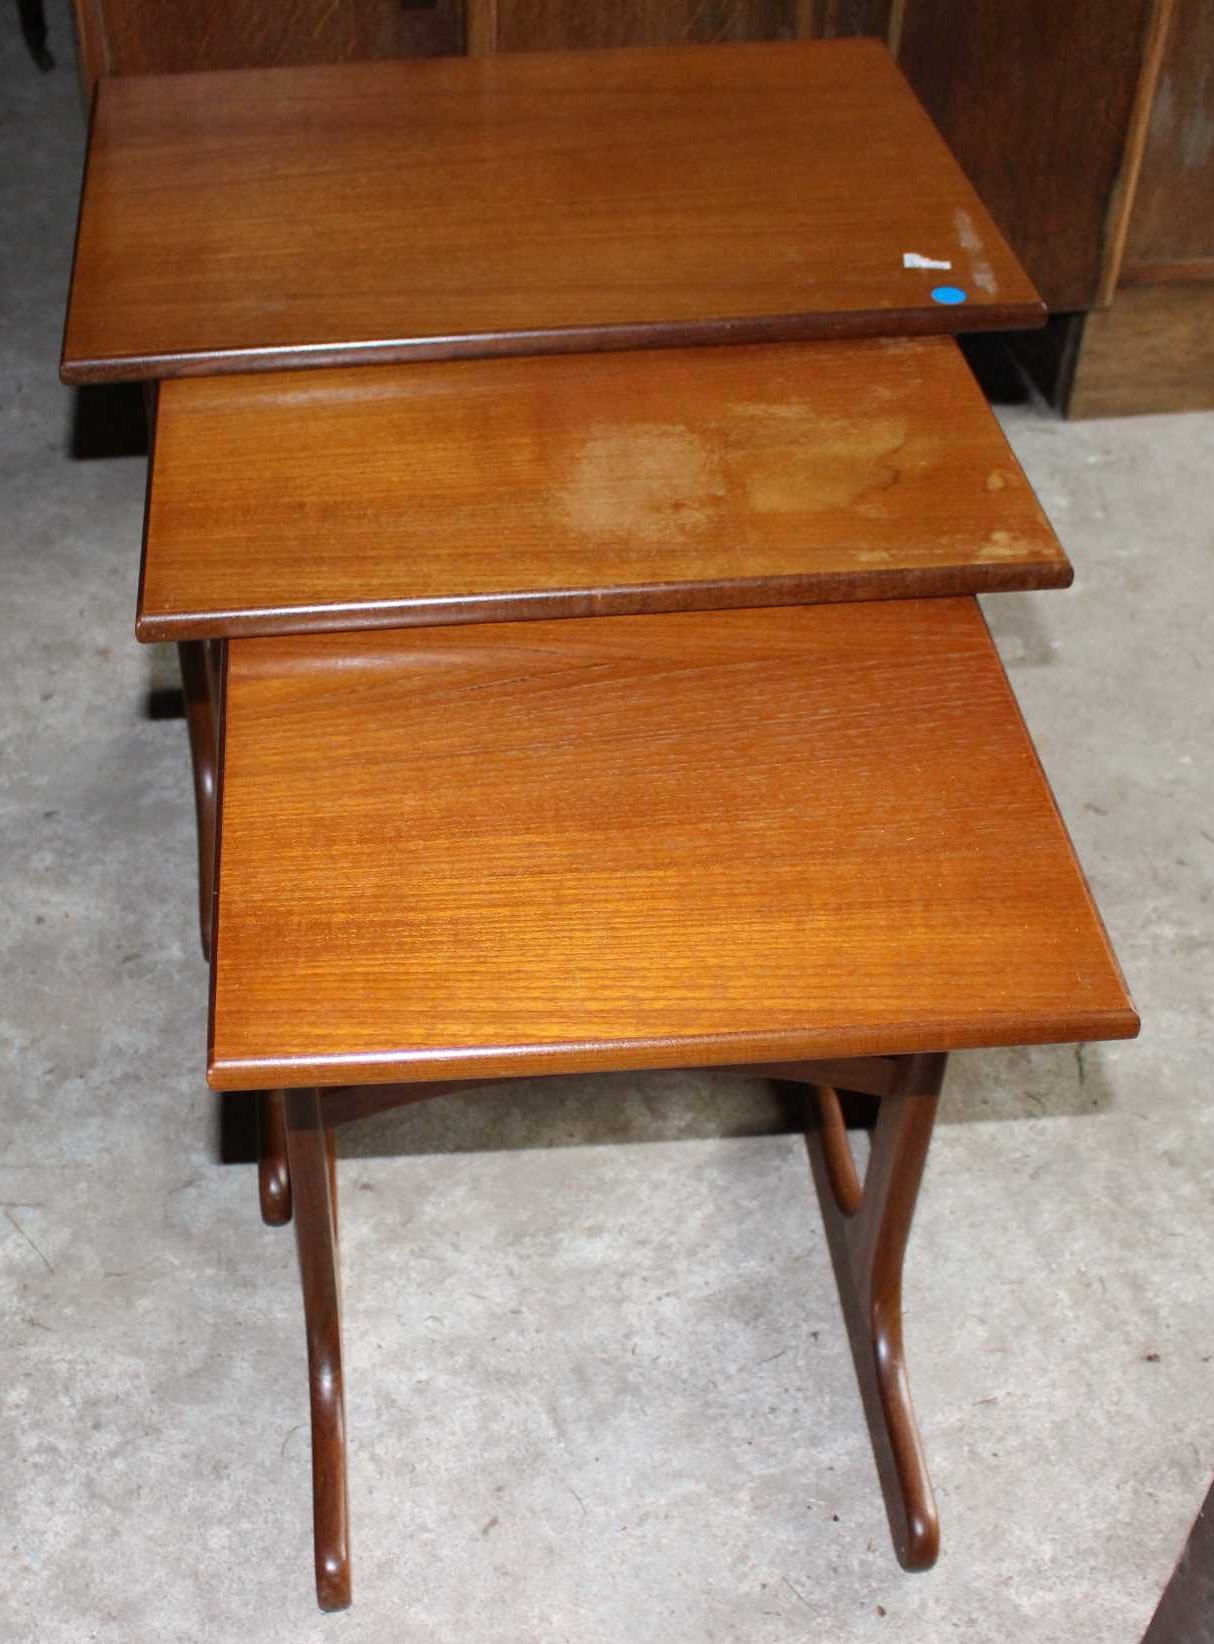 Mid Century Modern G Plan Teak Nesting Tables, middle table does have some water/wear staining. - Image 3 of 3